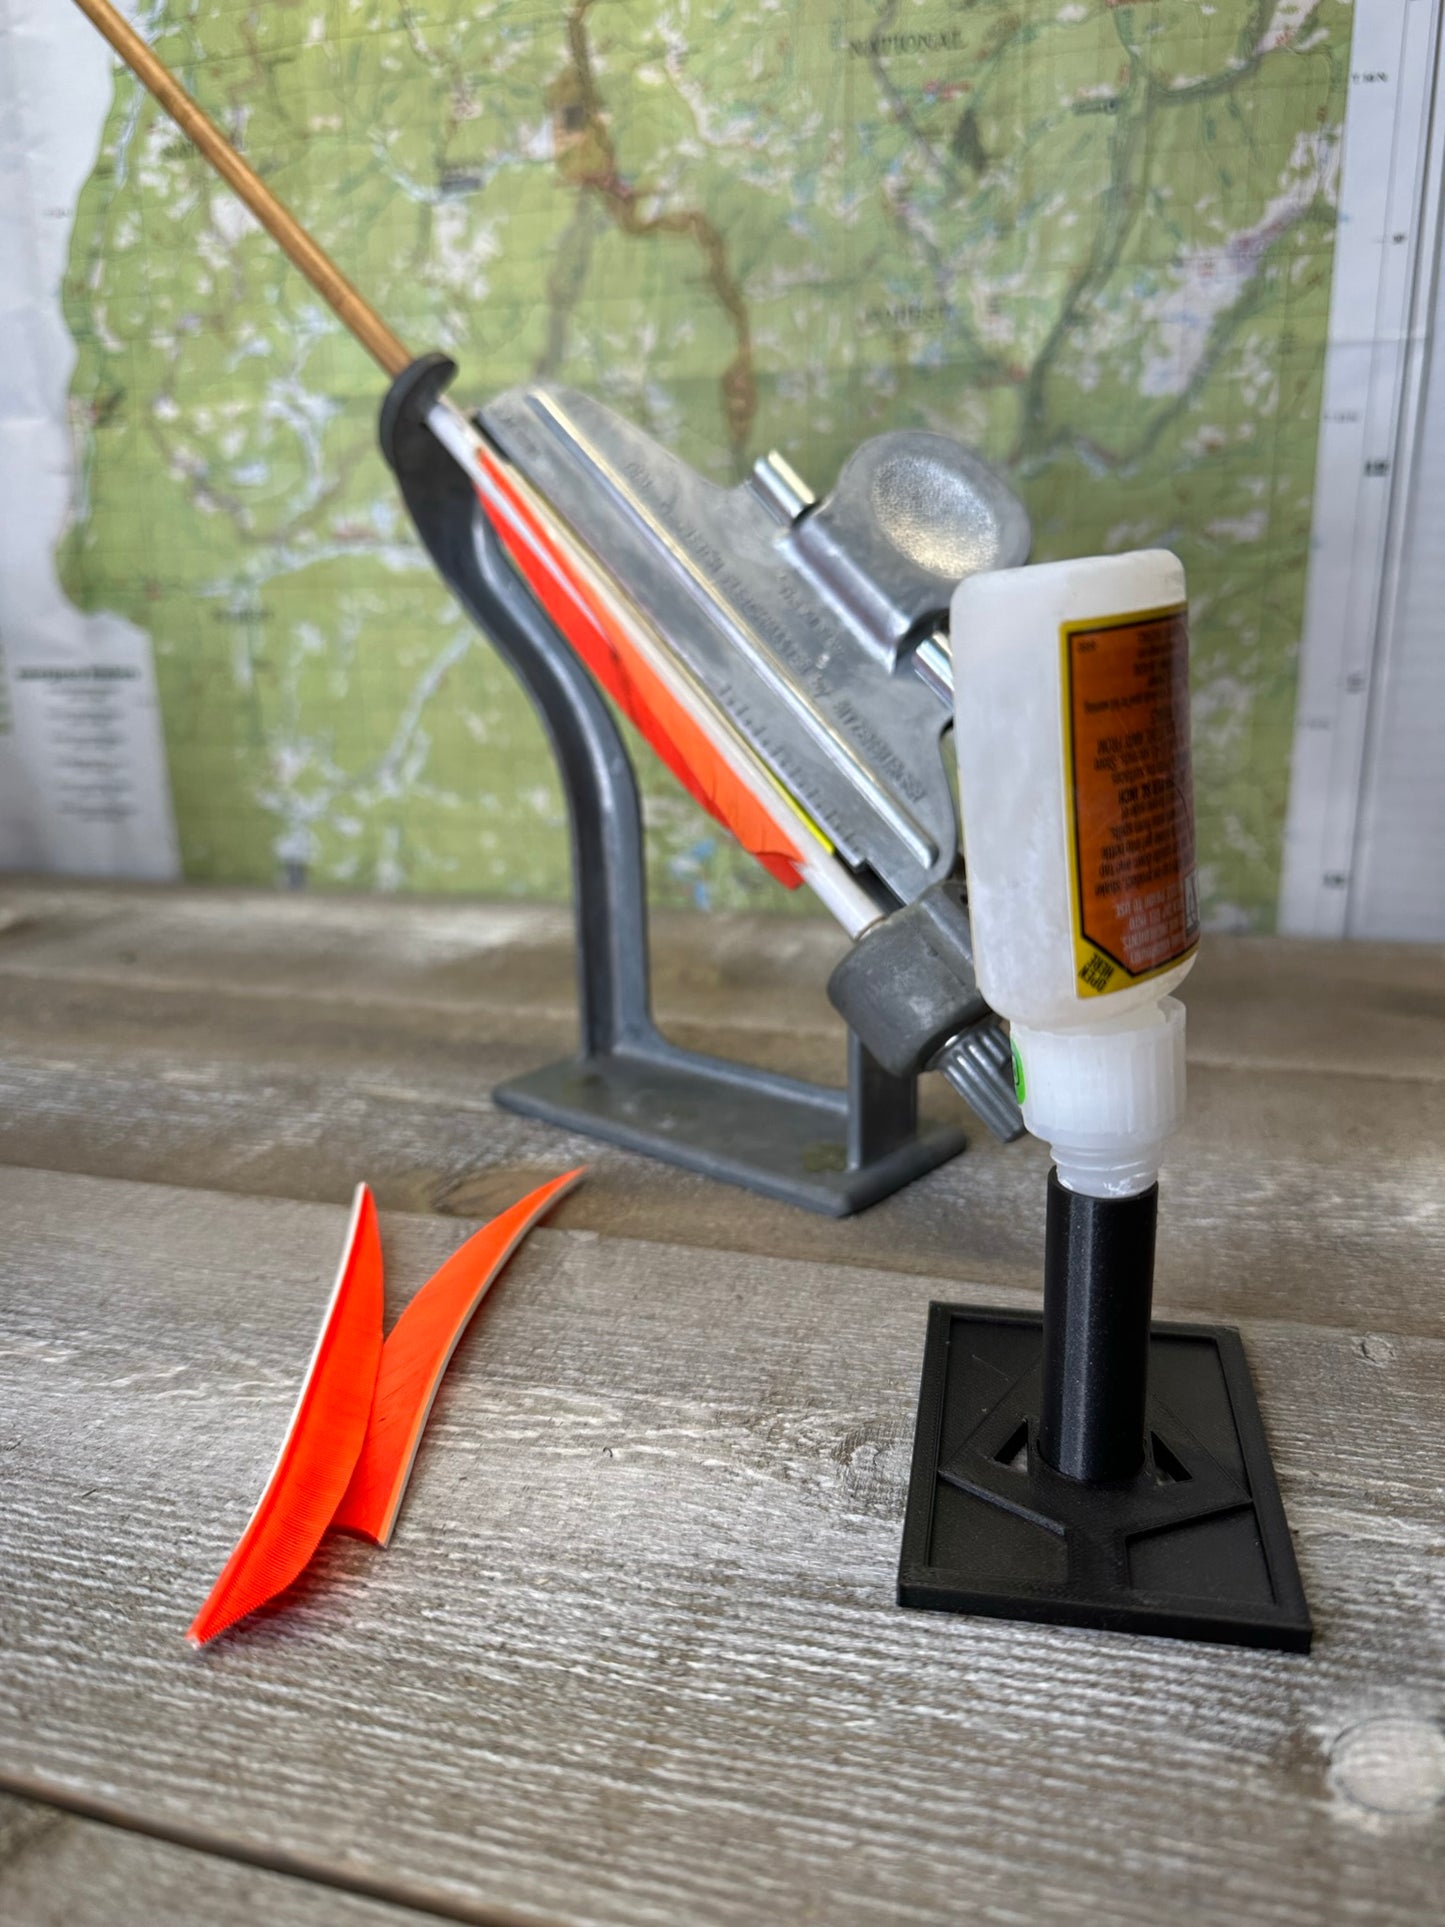 Glue stand for fletching arrows